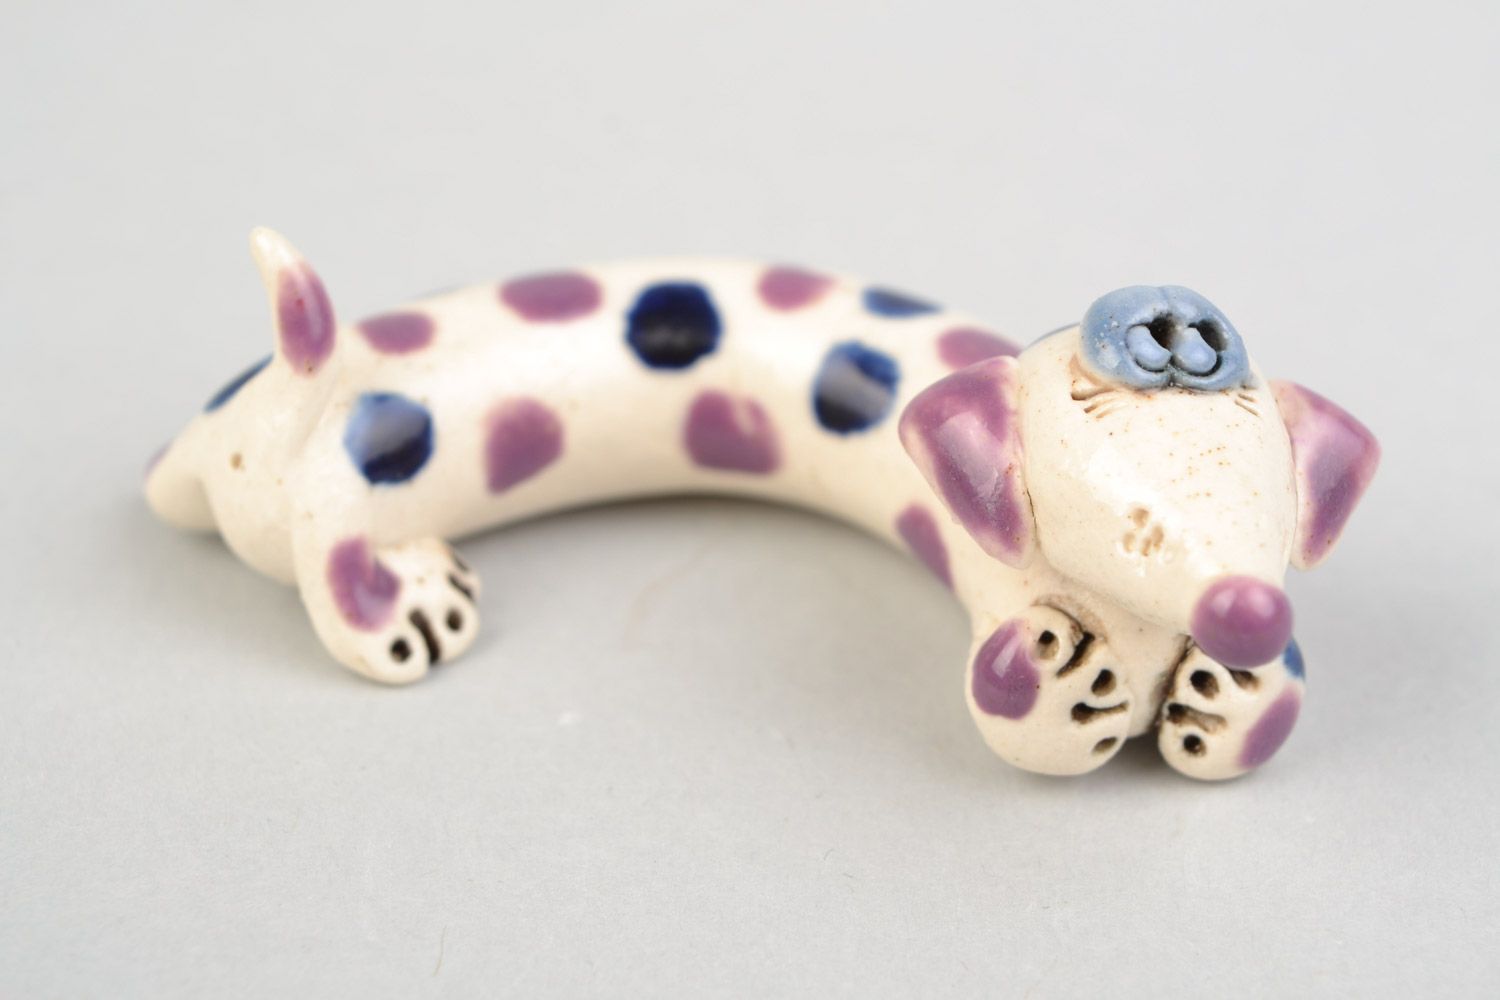 Clay handmade figurine dachshund dog colored with glaze painted with spots photo 1